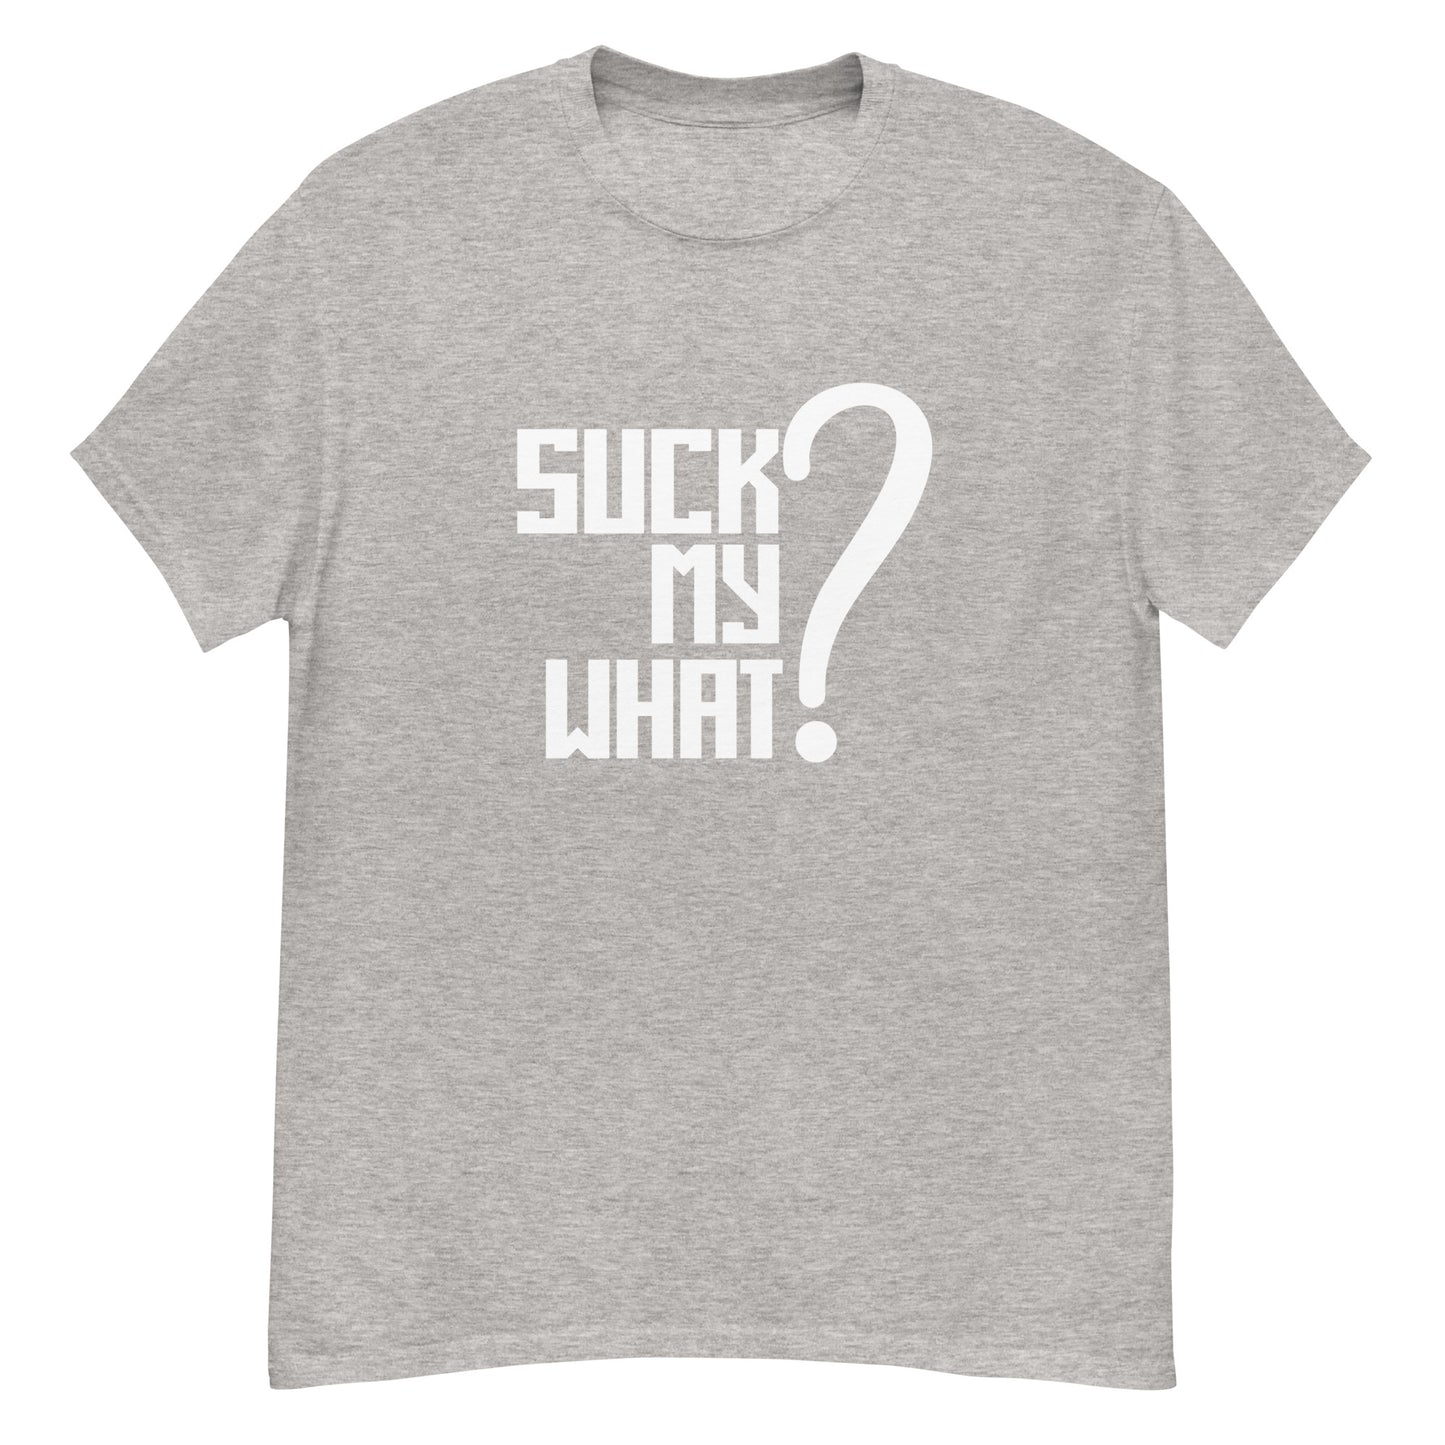 Suck My What? Center Stack Feels Men's Classic Tee (White Graphic)